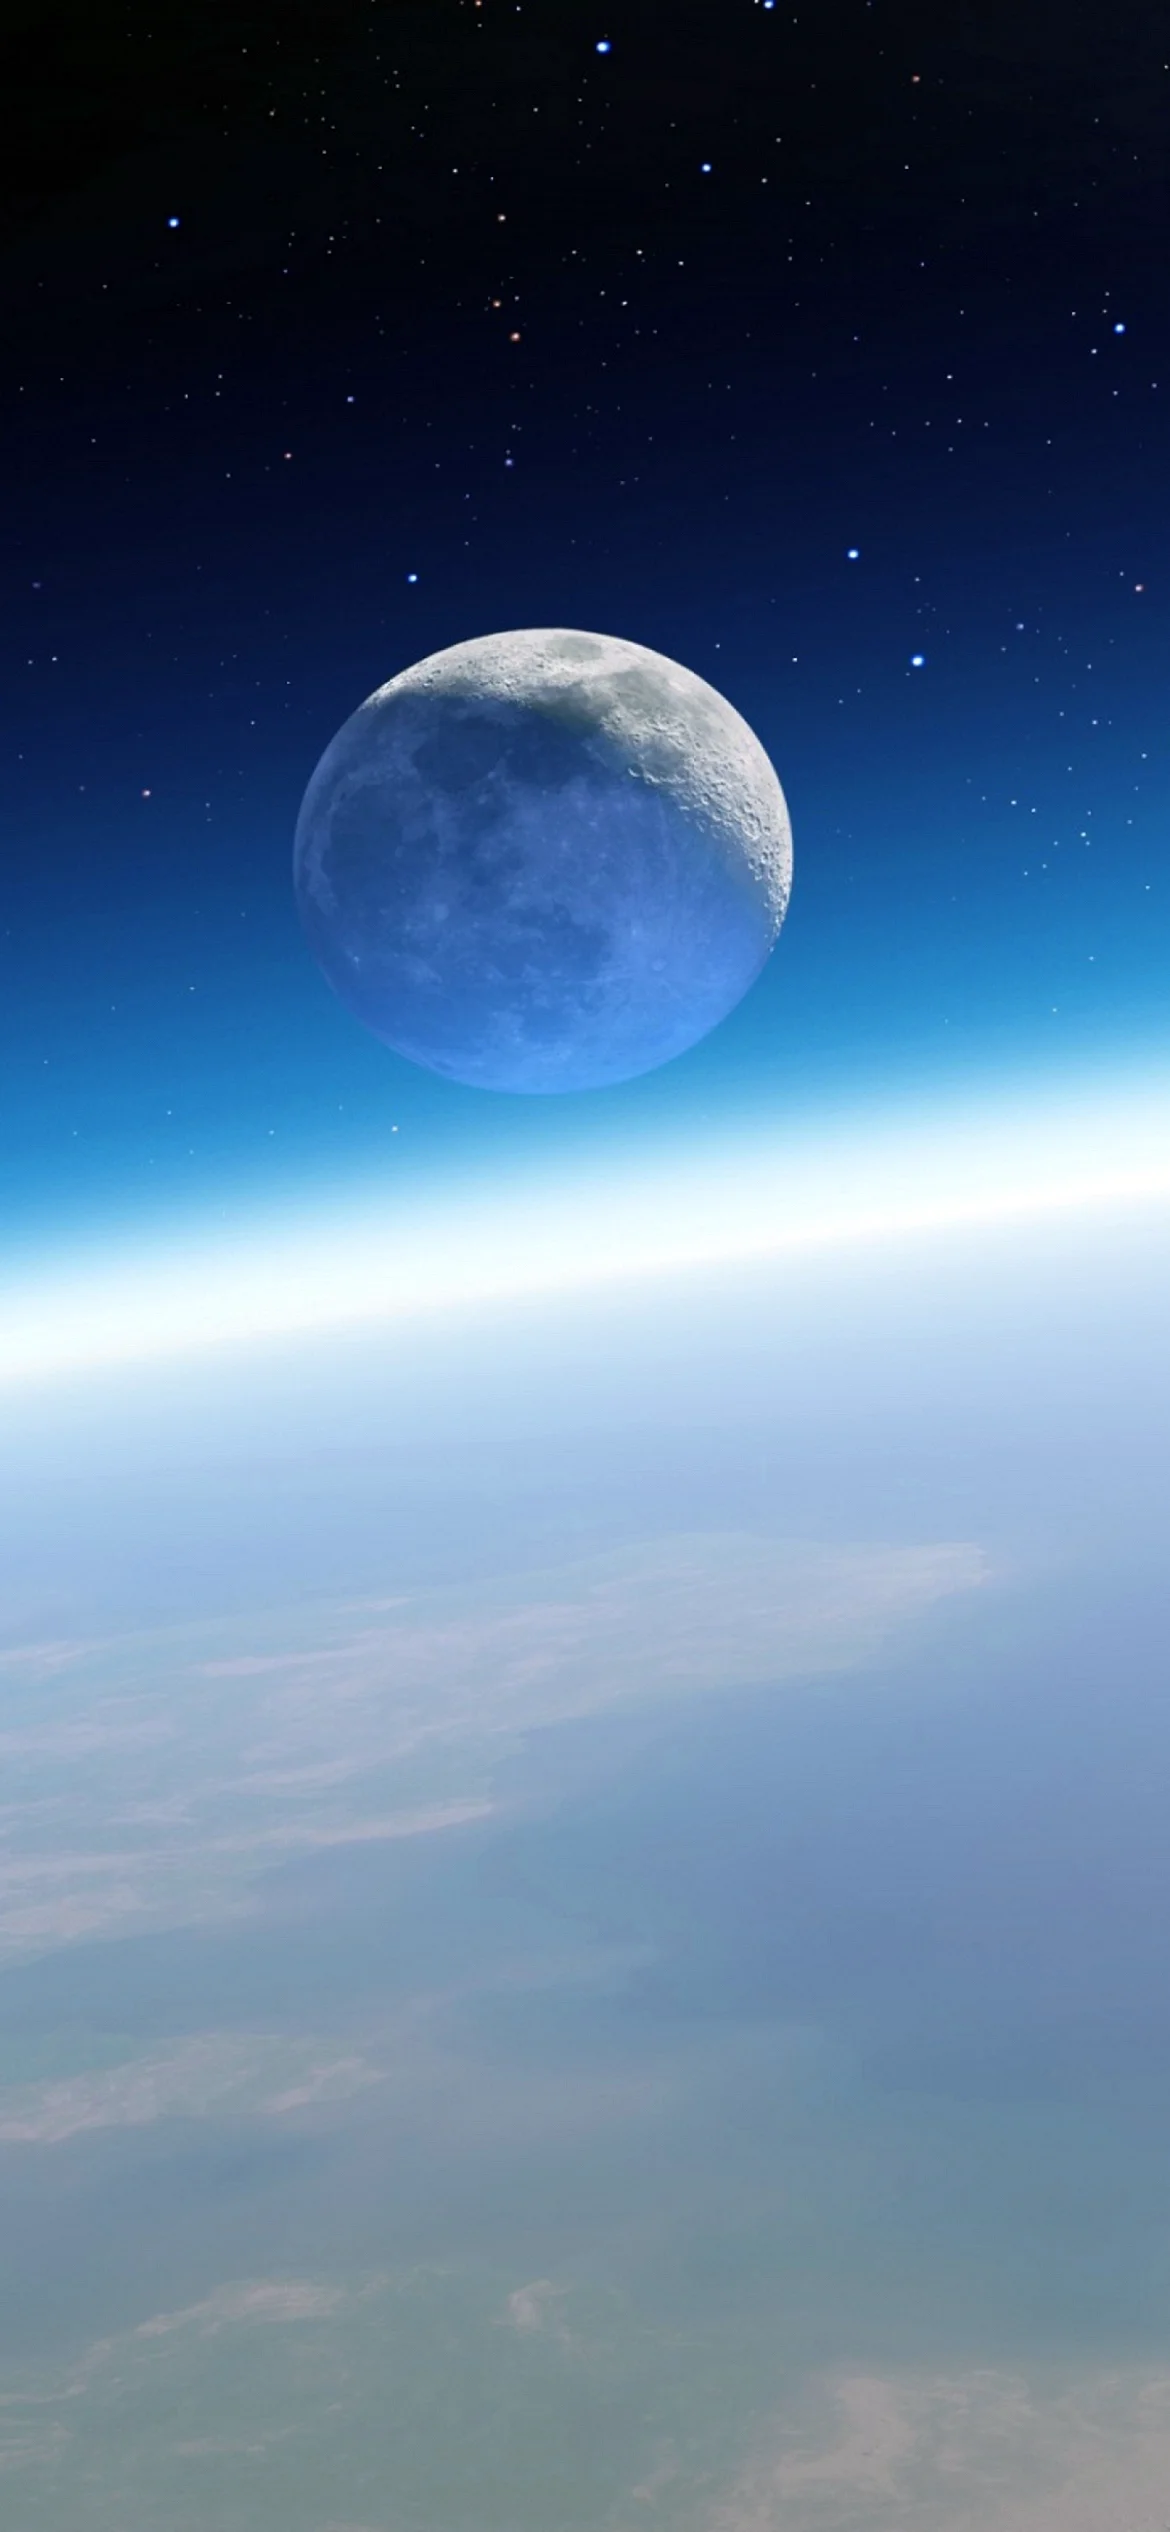 Planet Earth Wallpaper for iPhone 13 Pro